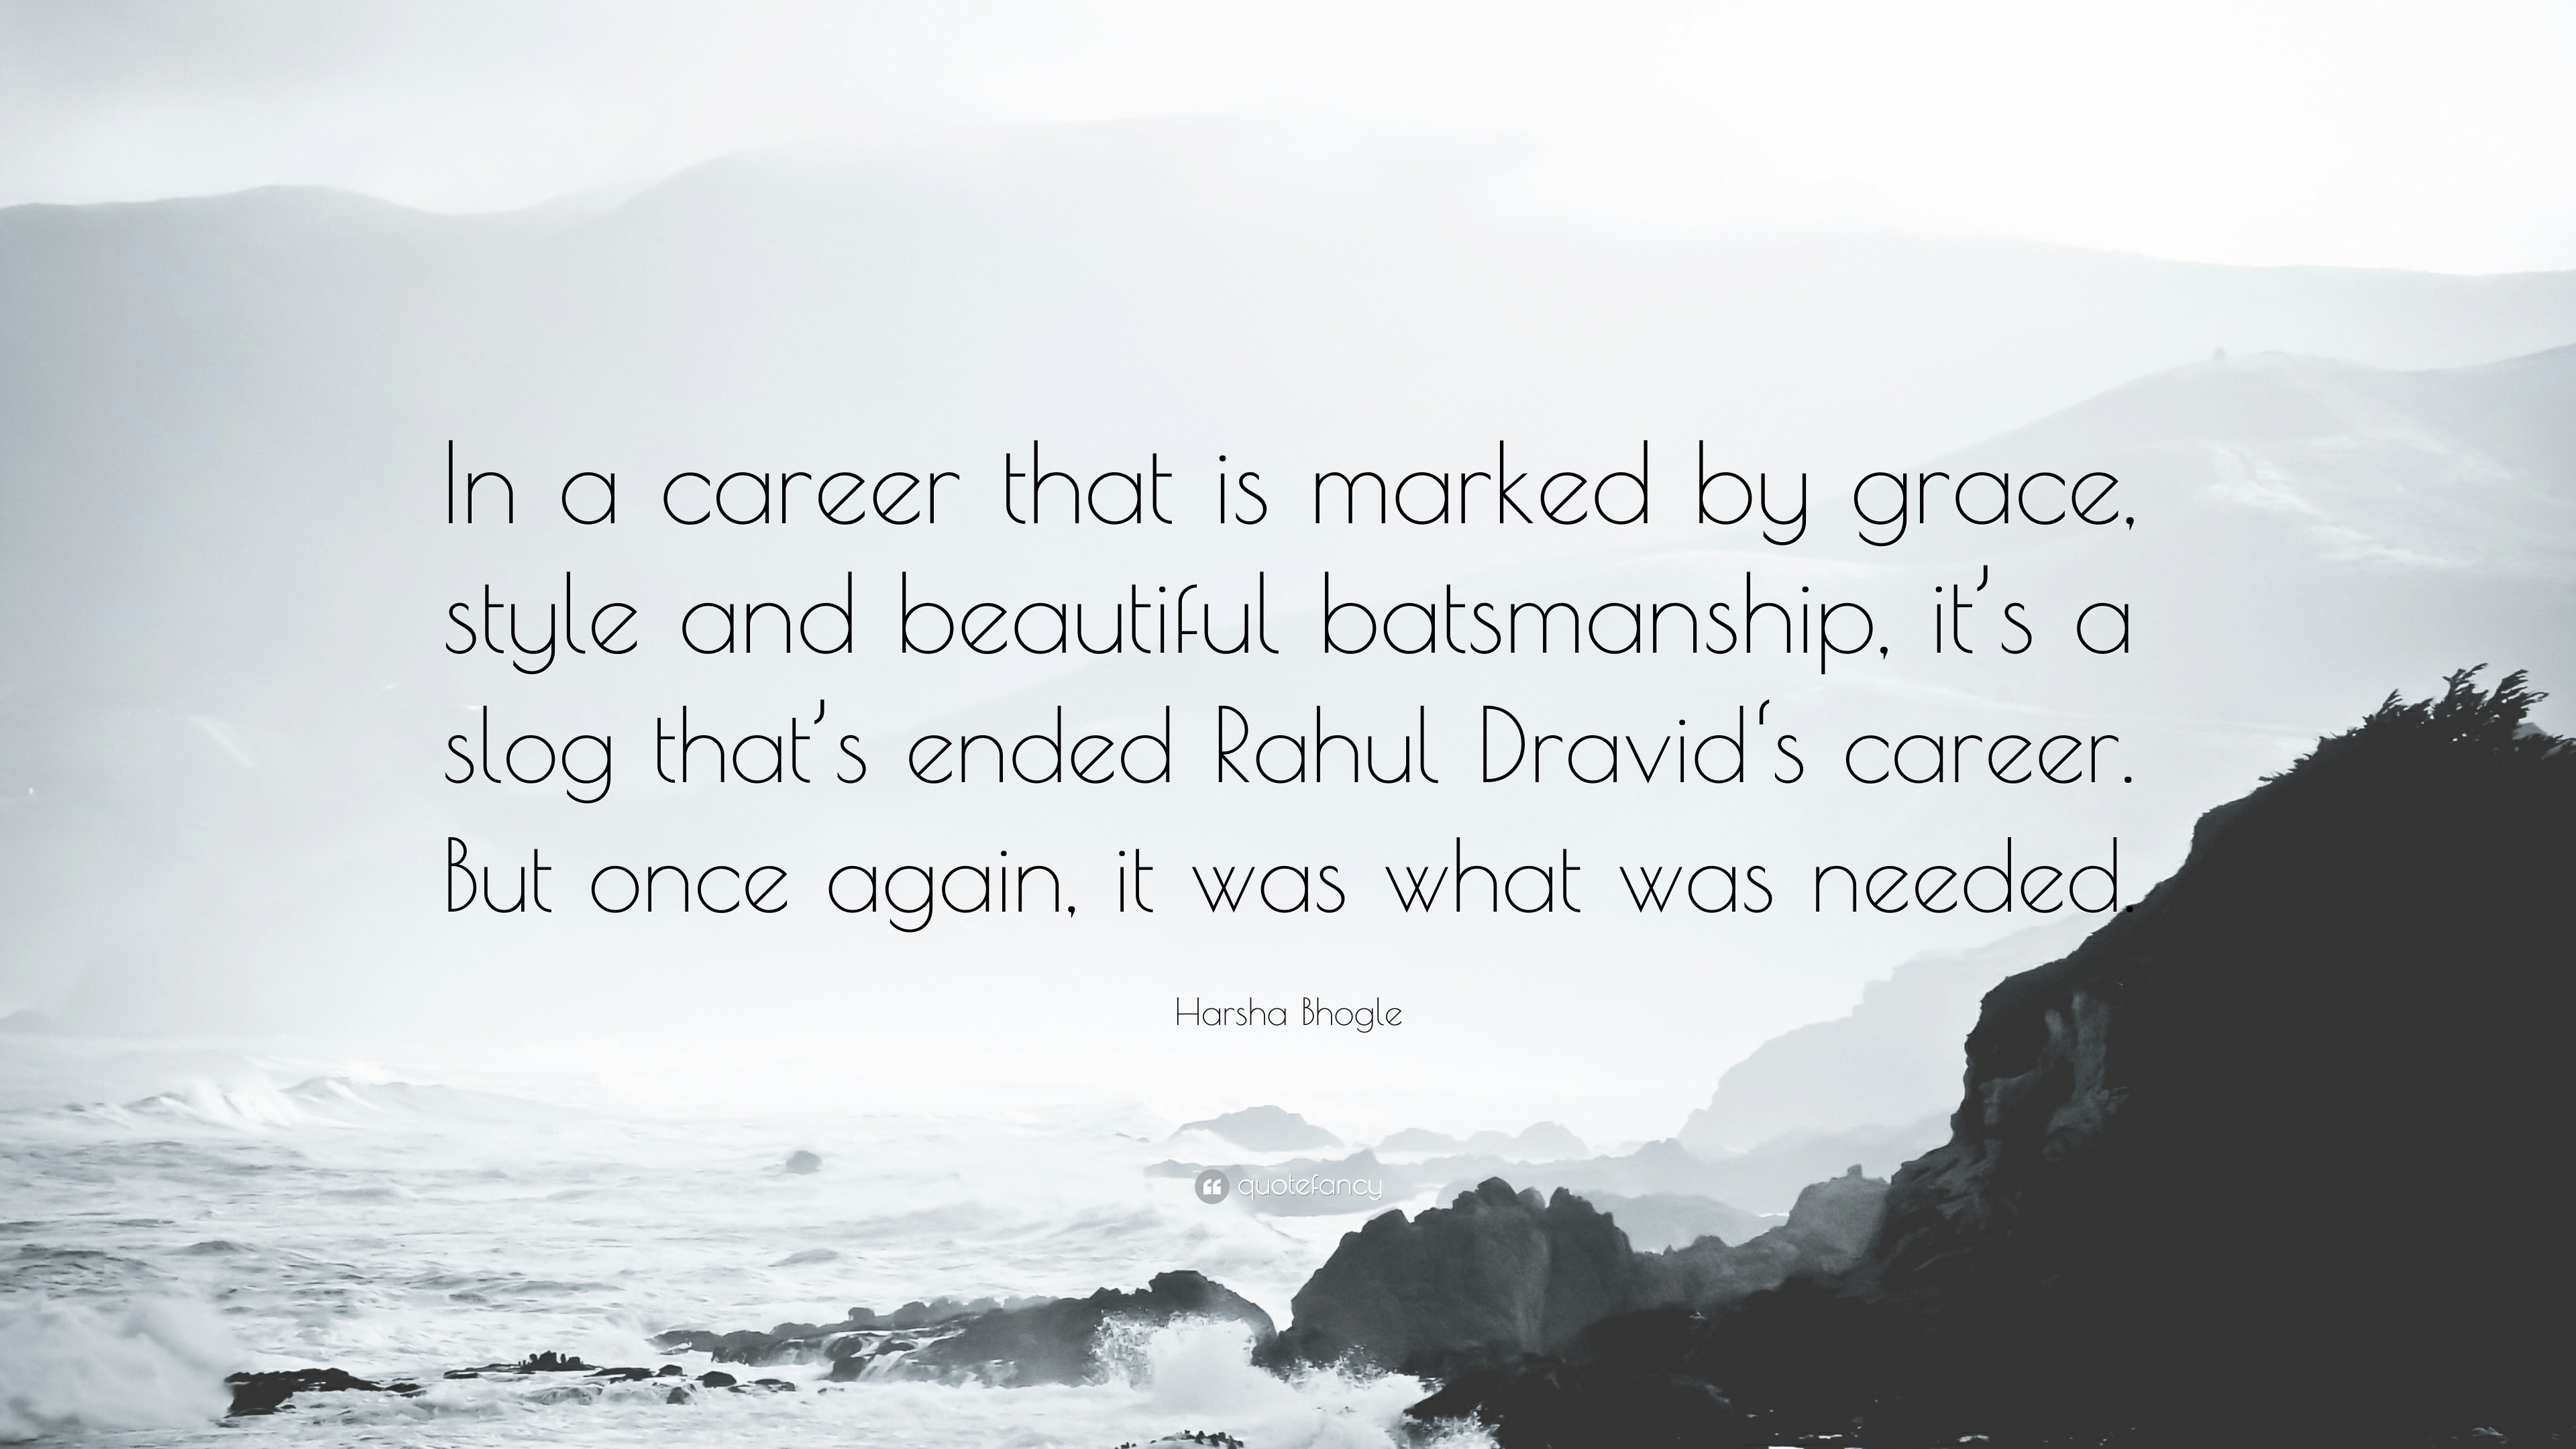 Harsha Bhogle Quote: “In a career that is marked by grace, style and